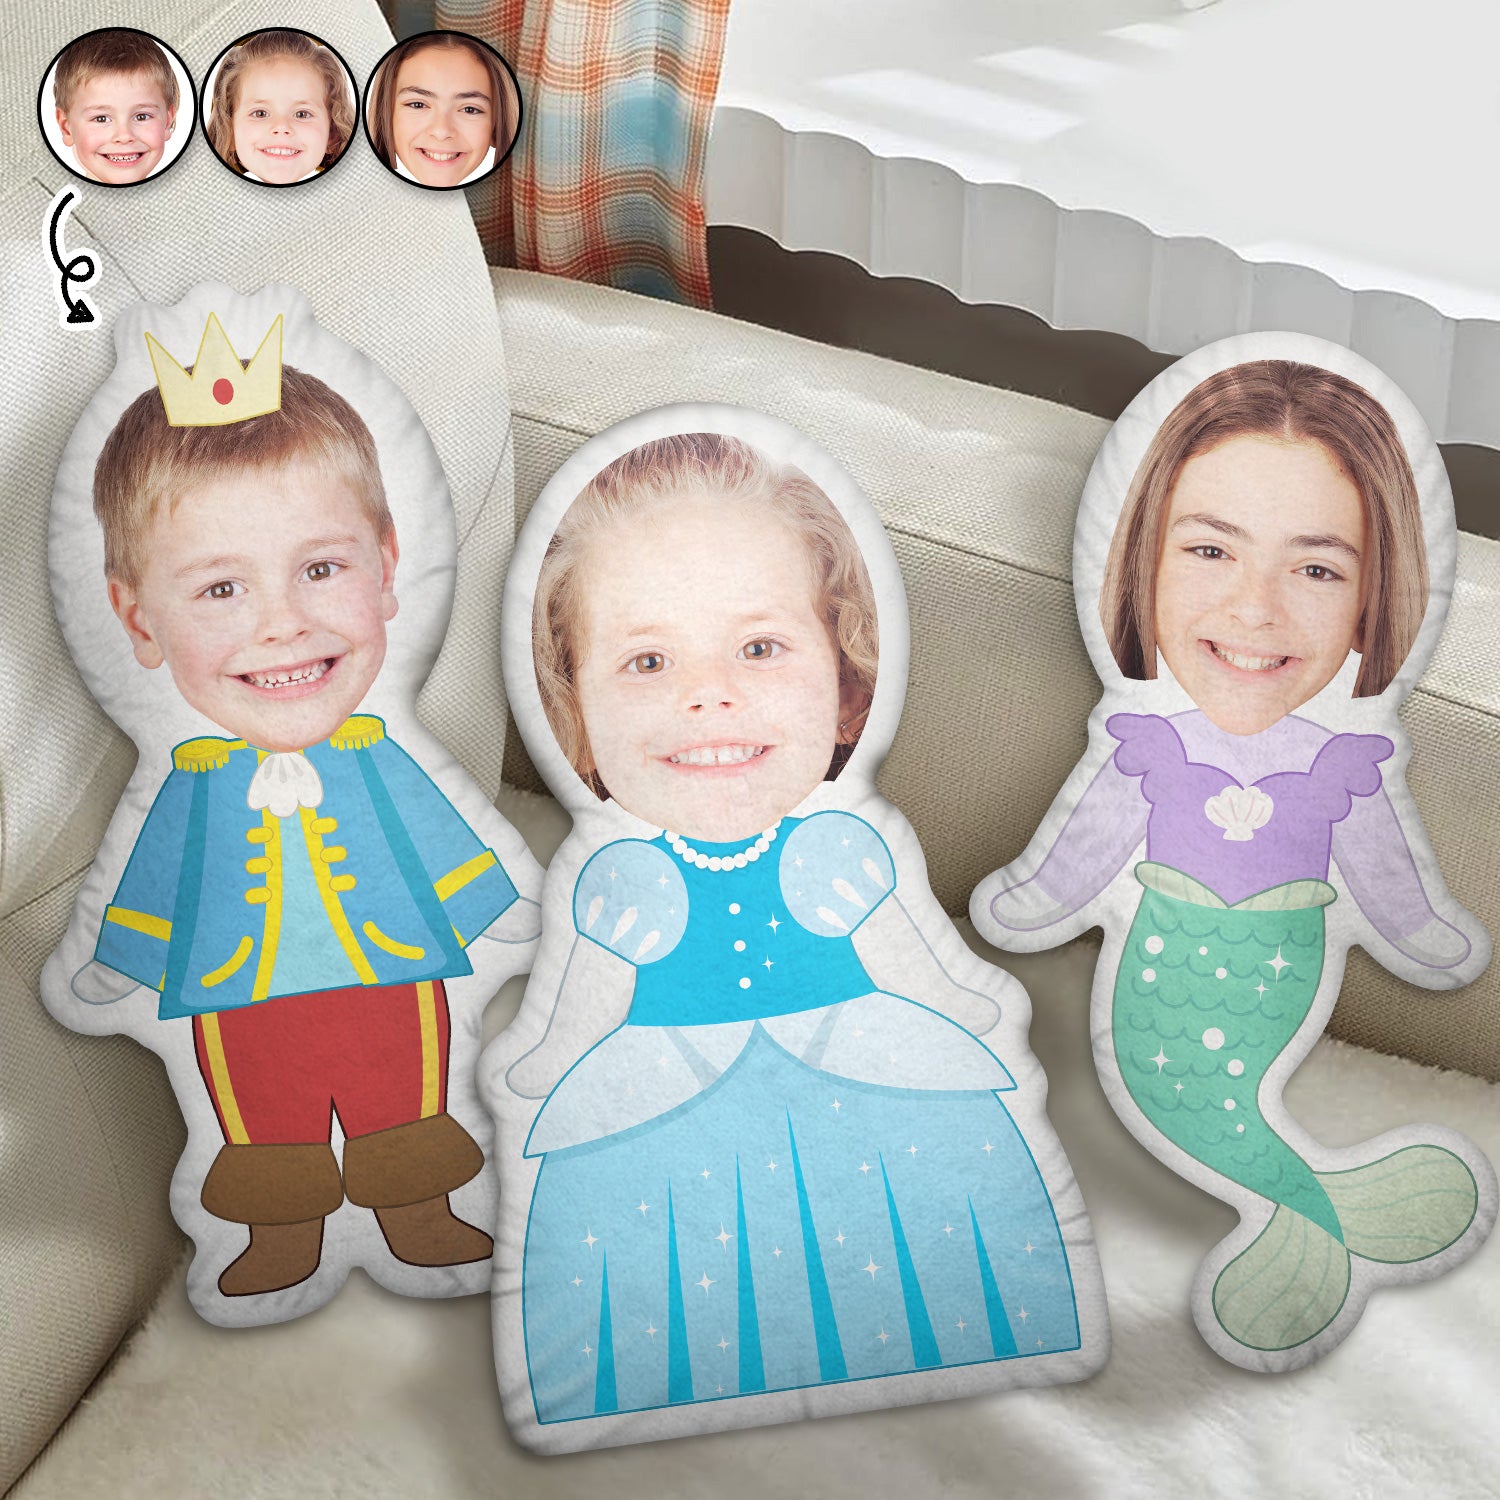 Custom Photo Funny Kid Fairy Tale Cosplay - Gift For Children, Grandkids - Personalized Custom Shaped Pillow